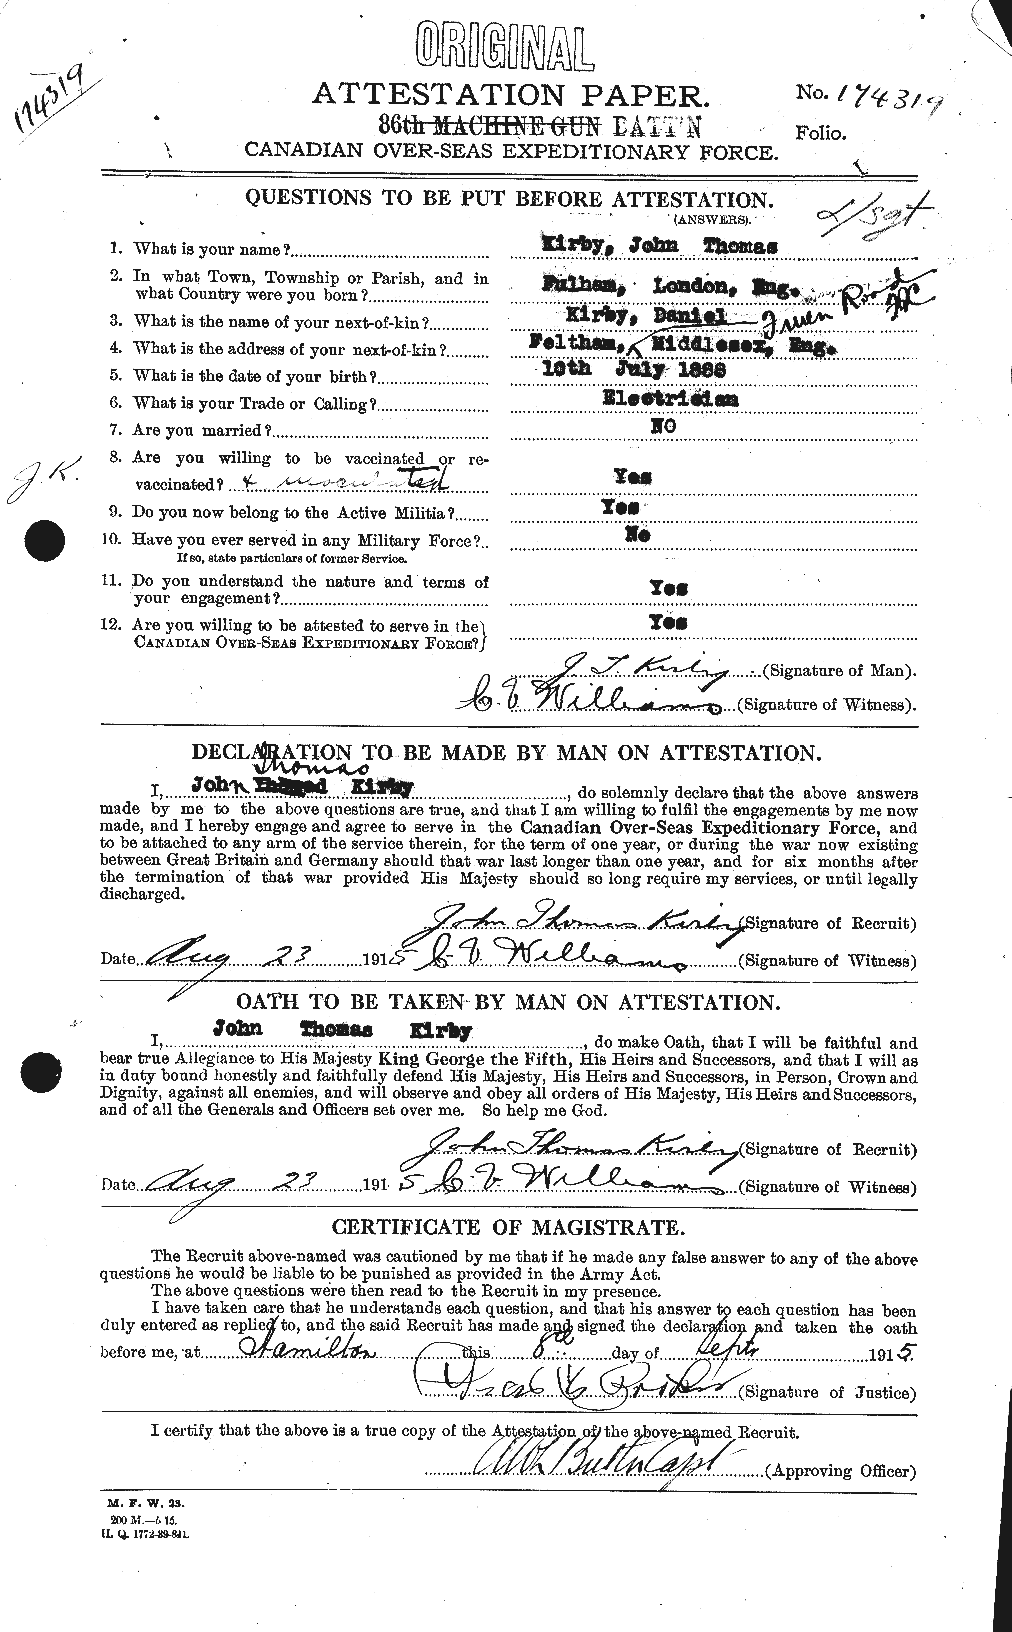 Personnel Records of the First World War - CEF 437237a